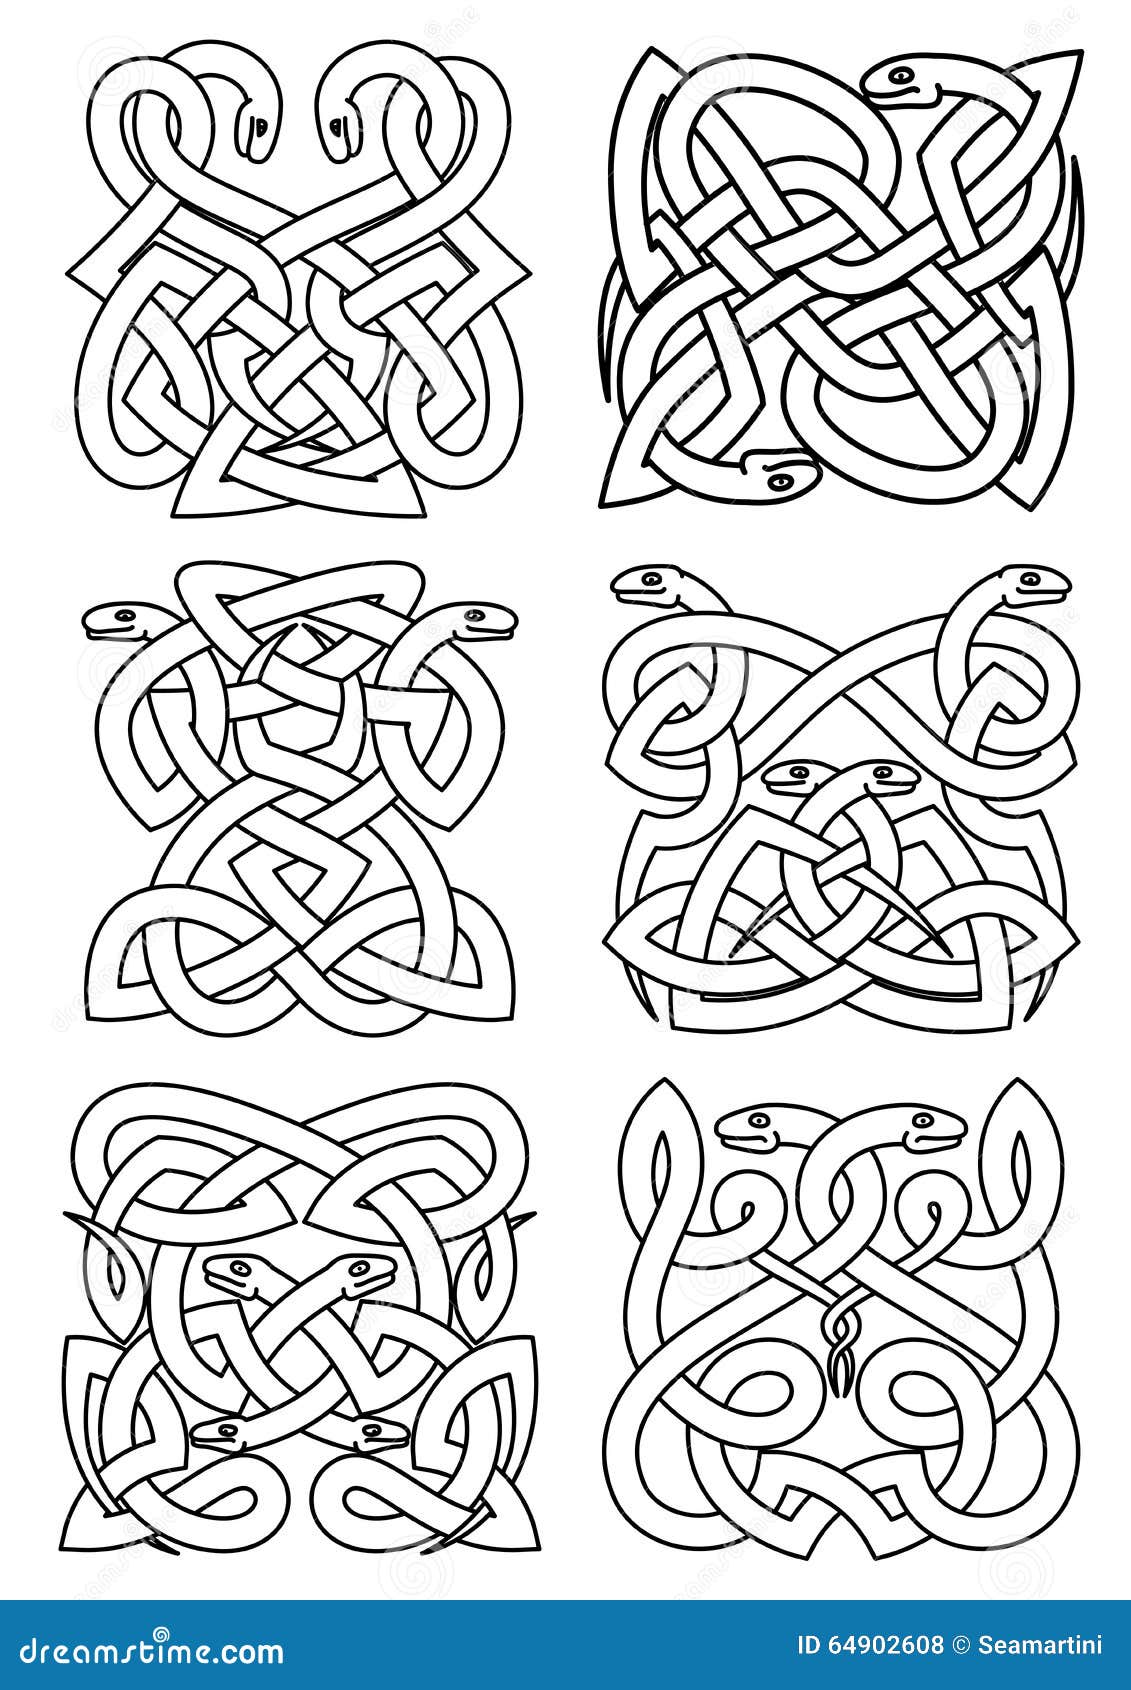 806 Animal Celtic Knot Images Stock Photos  Vectors  Shutterstock